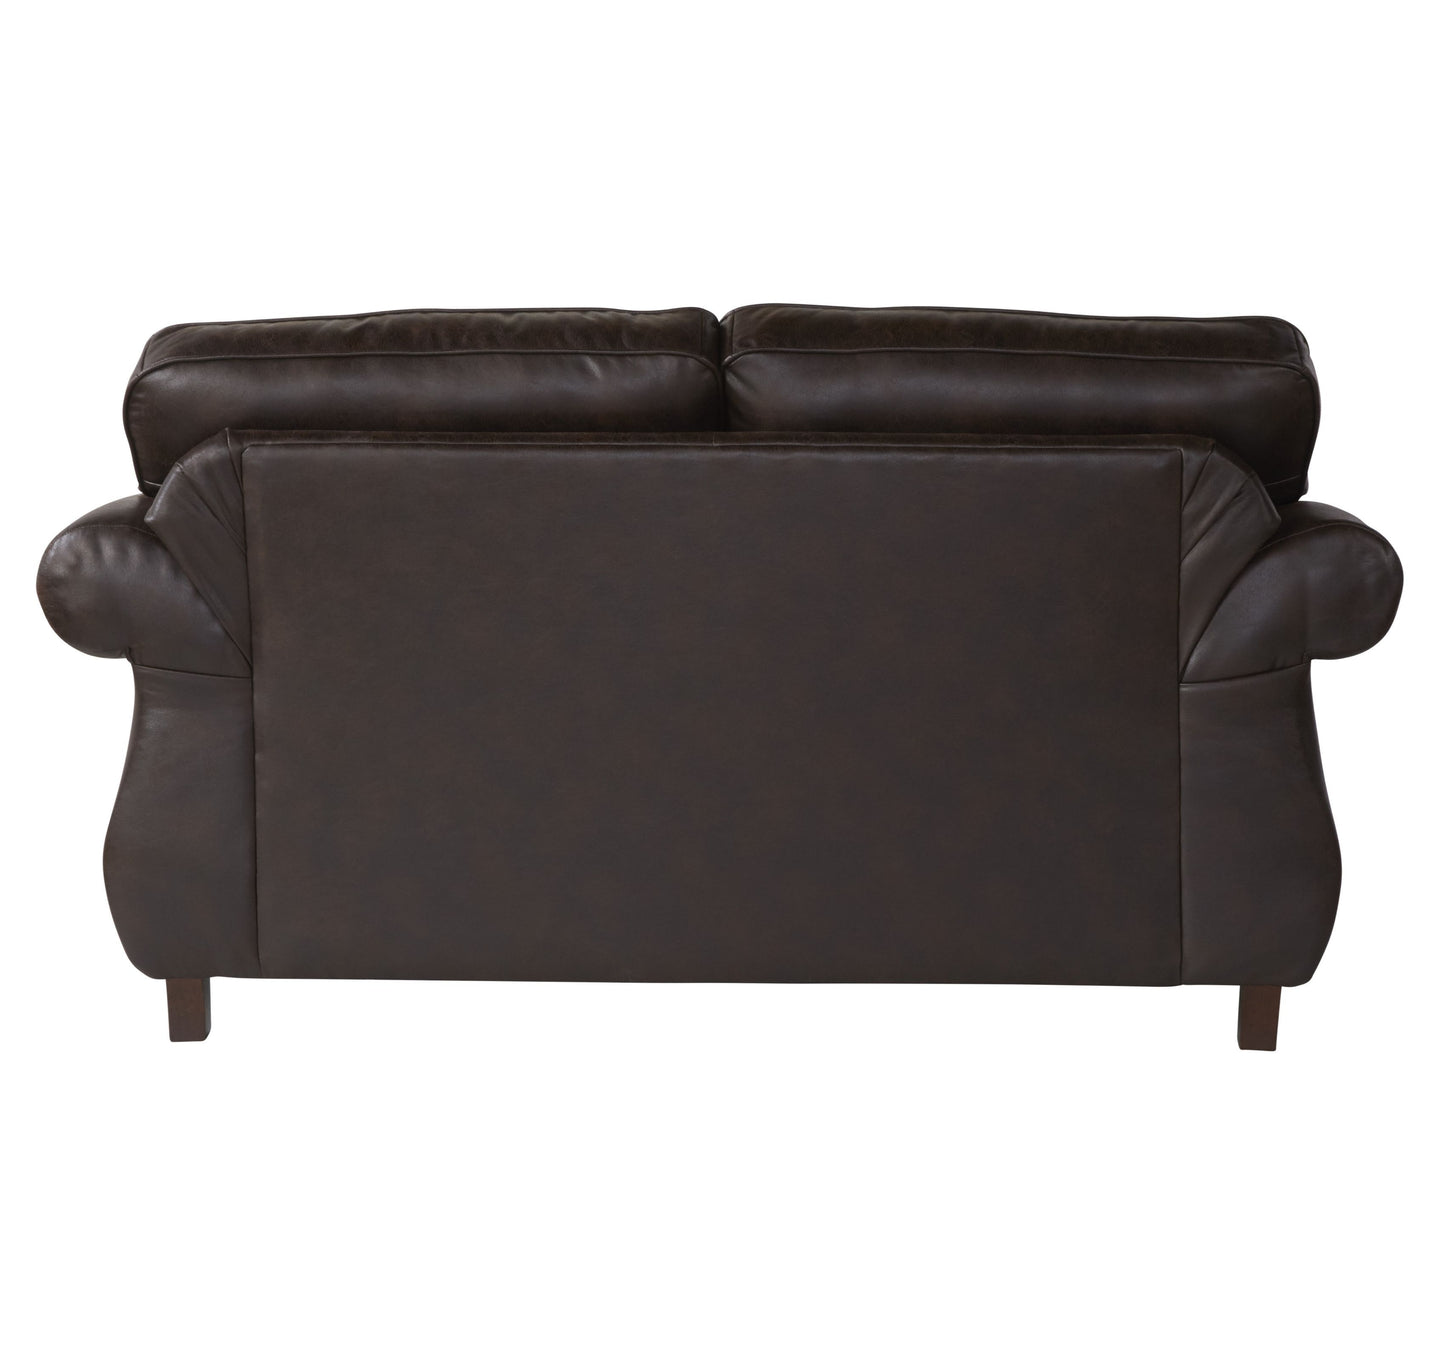 Leinster Faux Leather Upholstered Nailhead Loveseat in Espresso